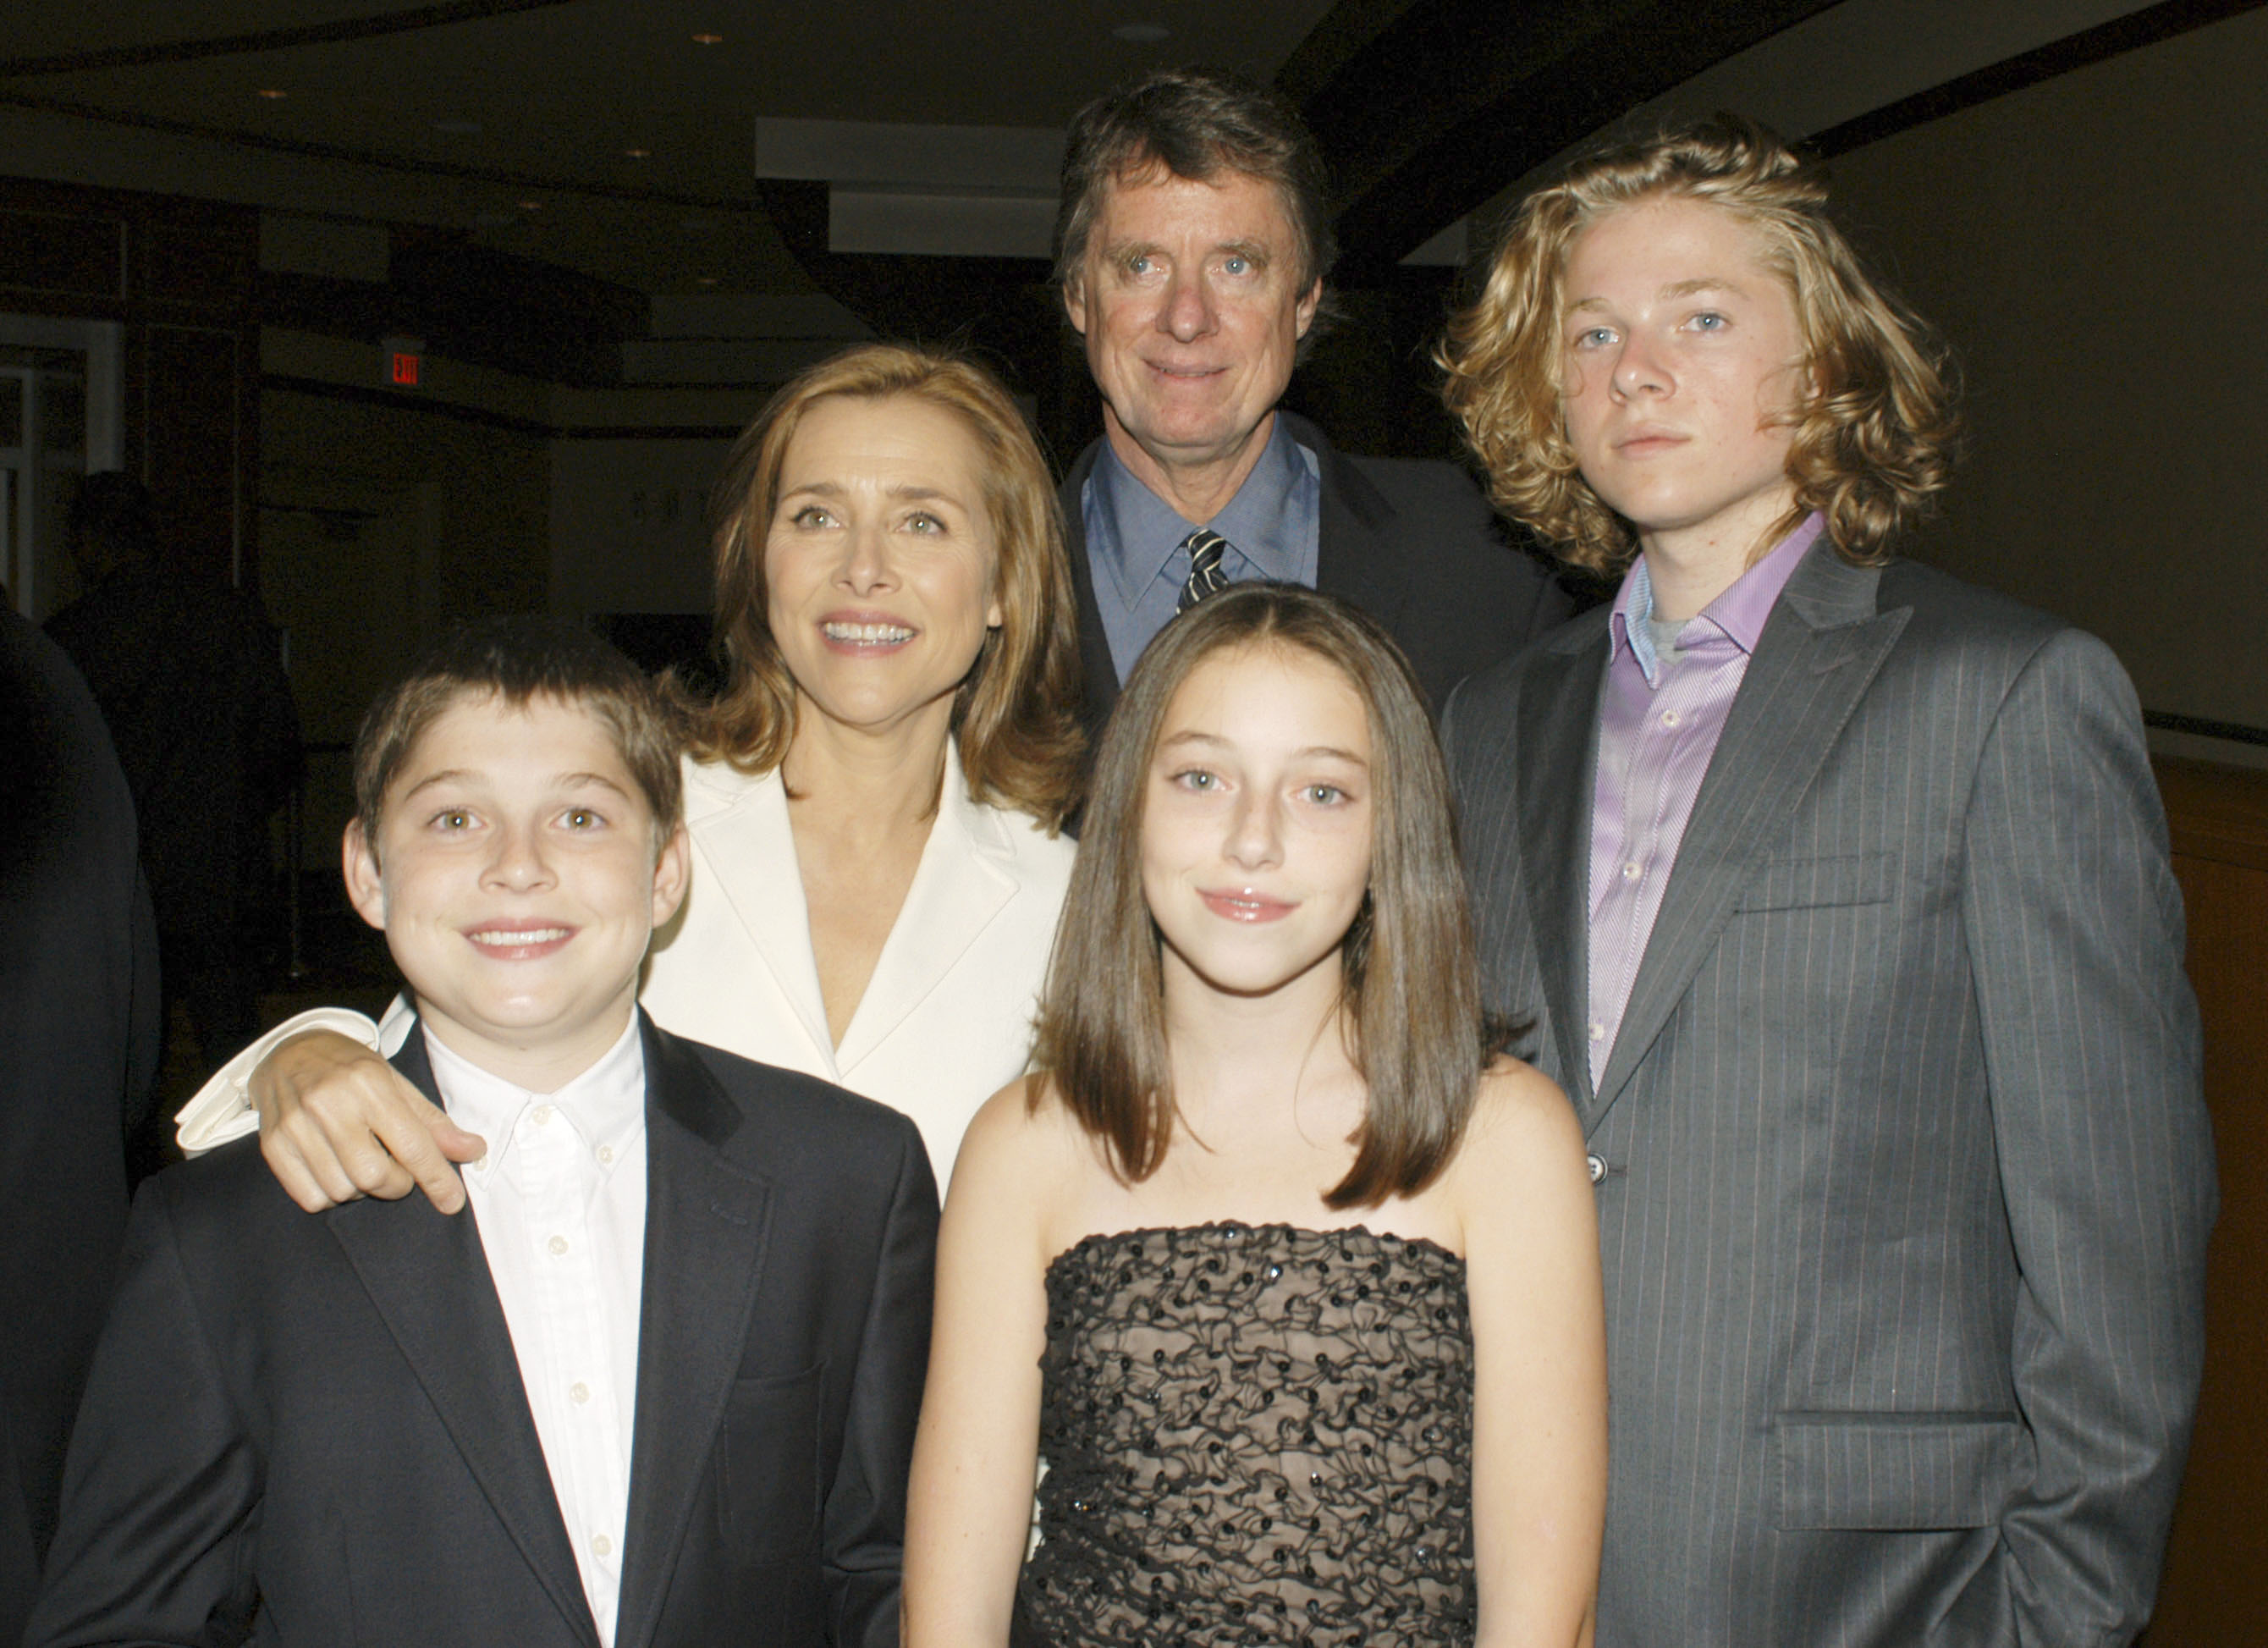 Meredith Vieira and Richard M. Cohen, with their children Gabriel, Millie, and Ben attend the Dinner of Champions "Concert at the Kodak" at the Kodak Theater in Hollywood, California on September 16, 2005. | Source: Getty Images